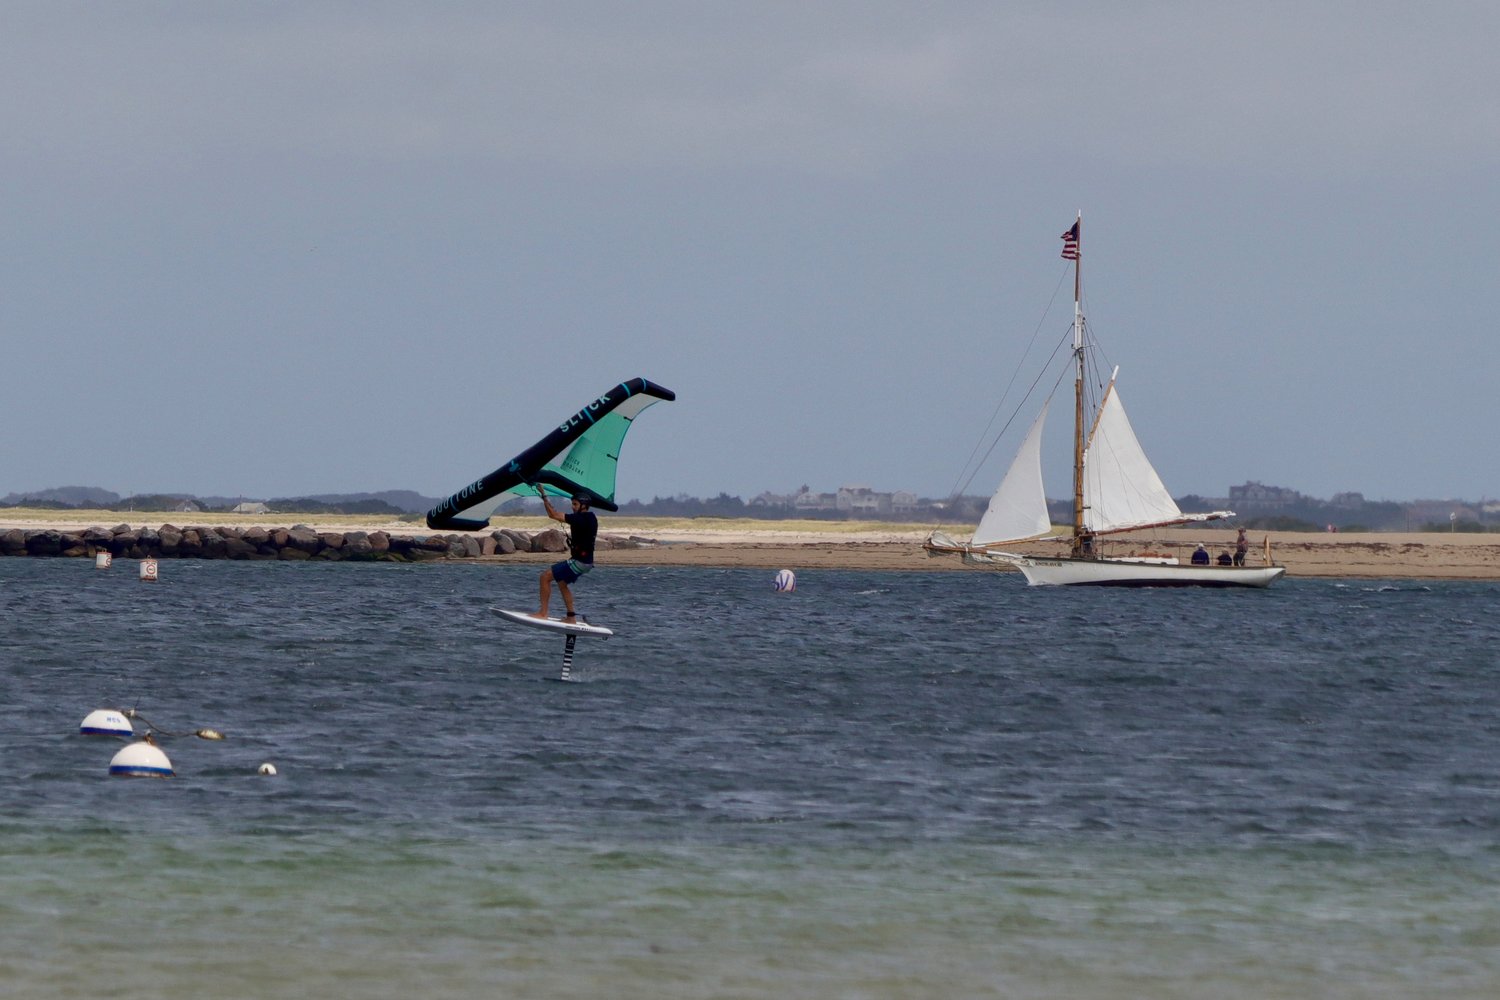 The new and old way of harnessing wind power. An unidenified windsurfer with the sailboat Endeavor heading out of the channel Monday afternoon.